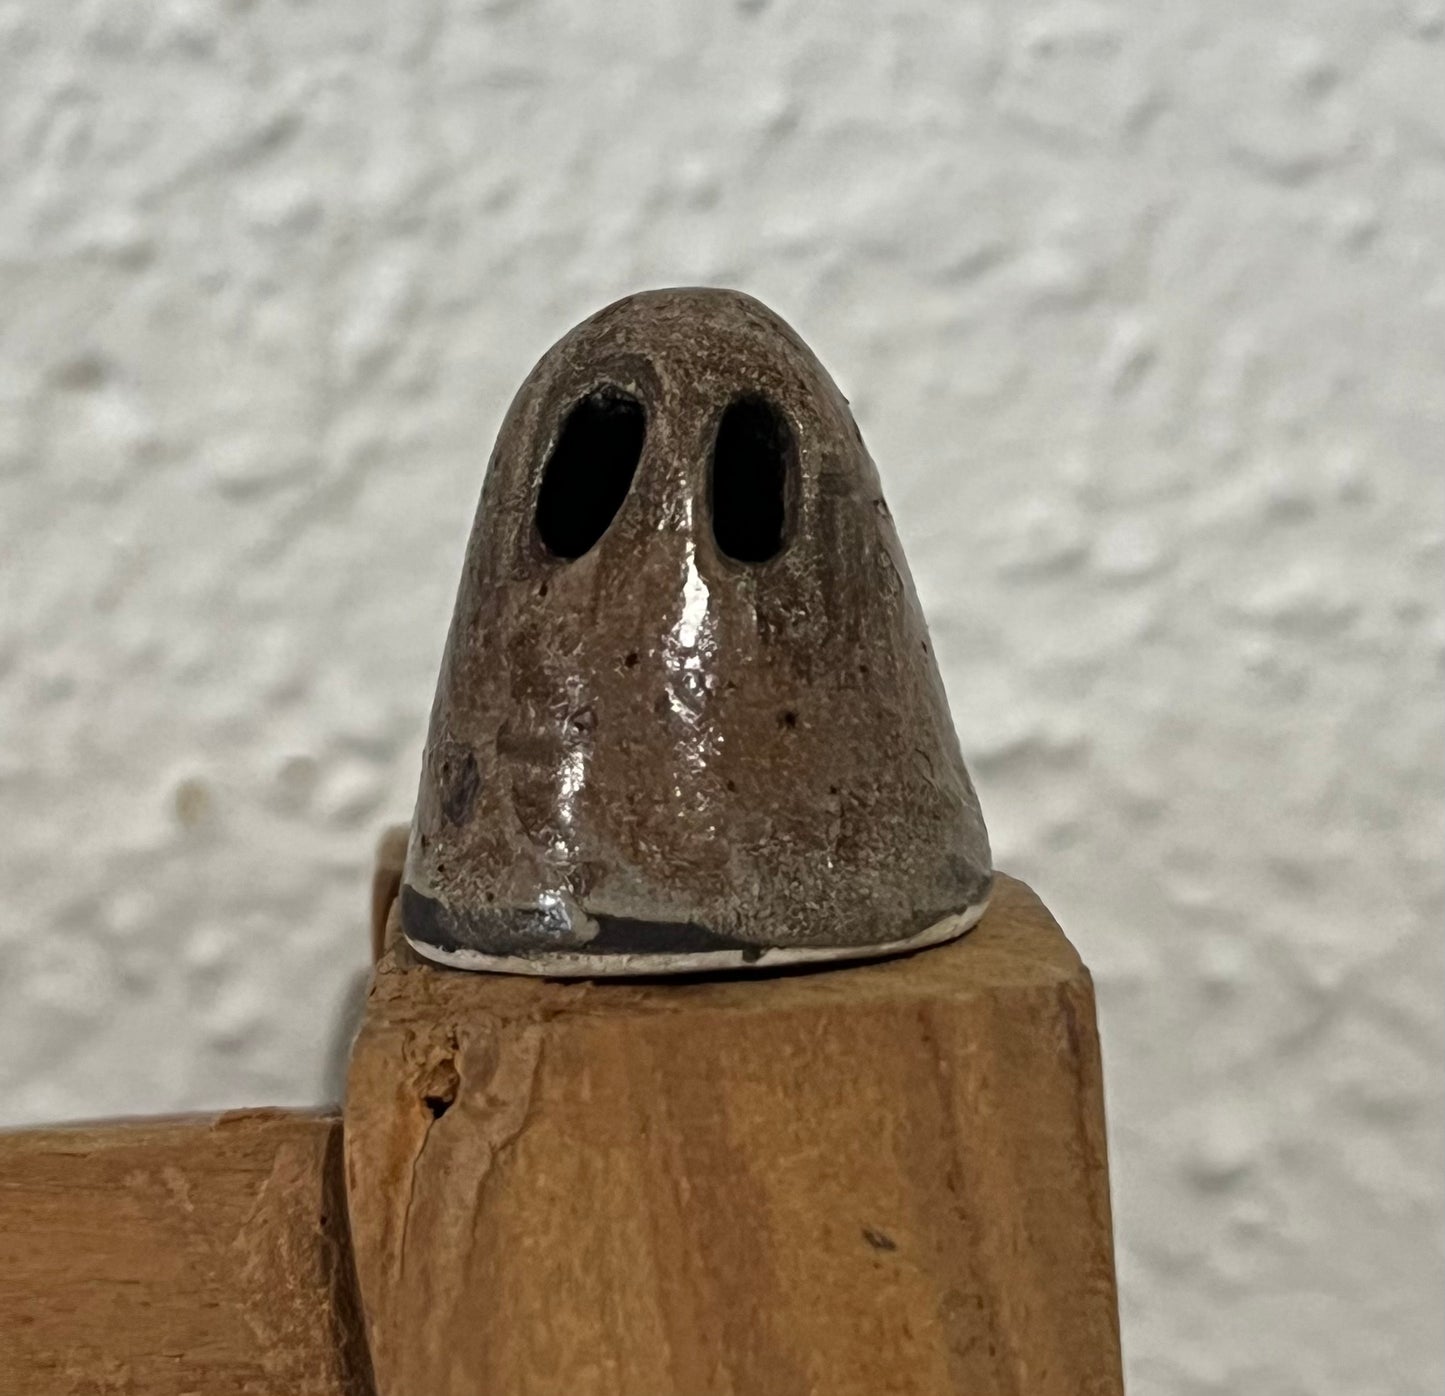 Ceramic ghost incense covers